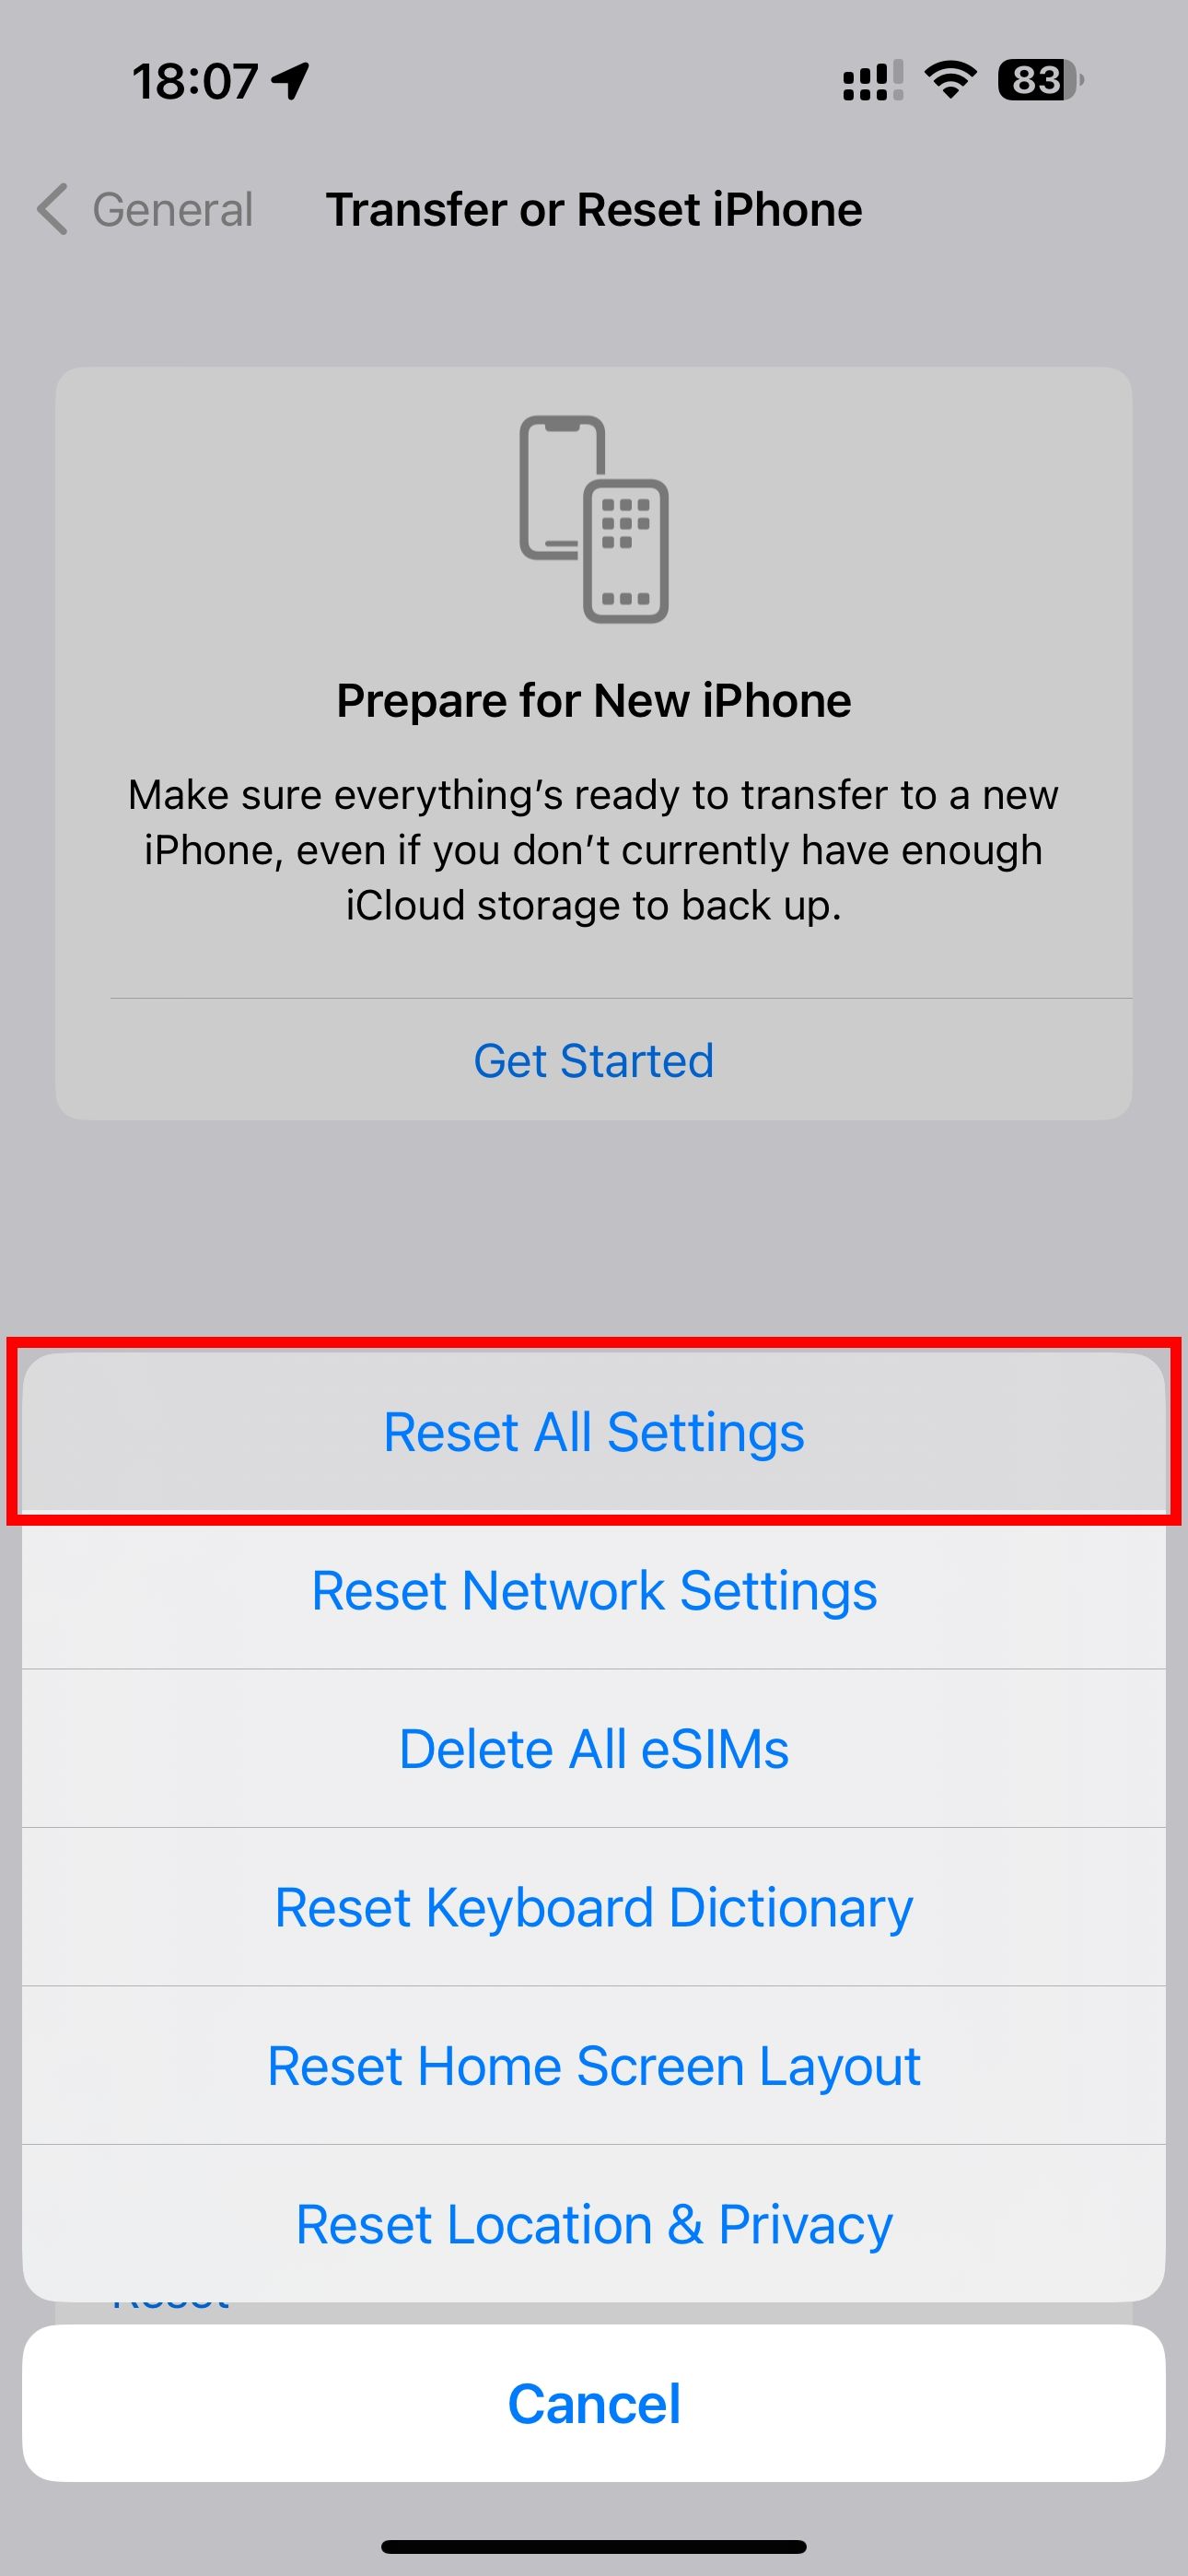 The iPhone Settings app with the Reset All Settings highlighted